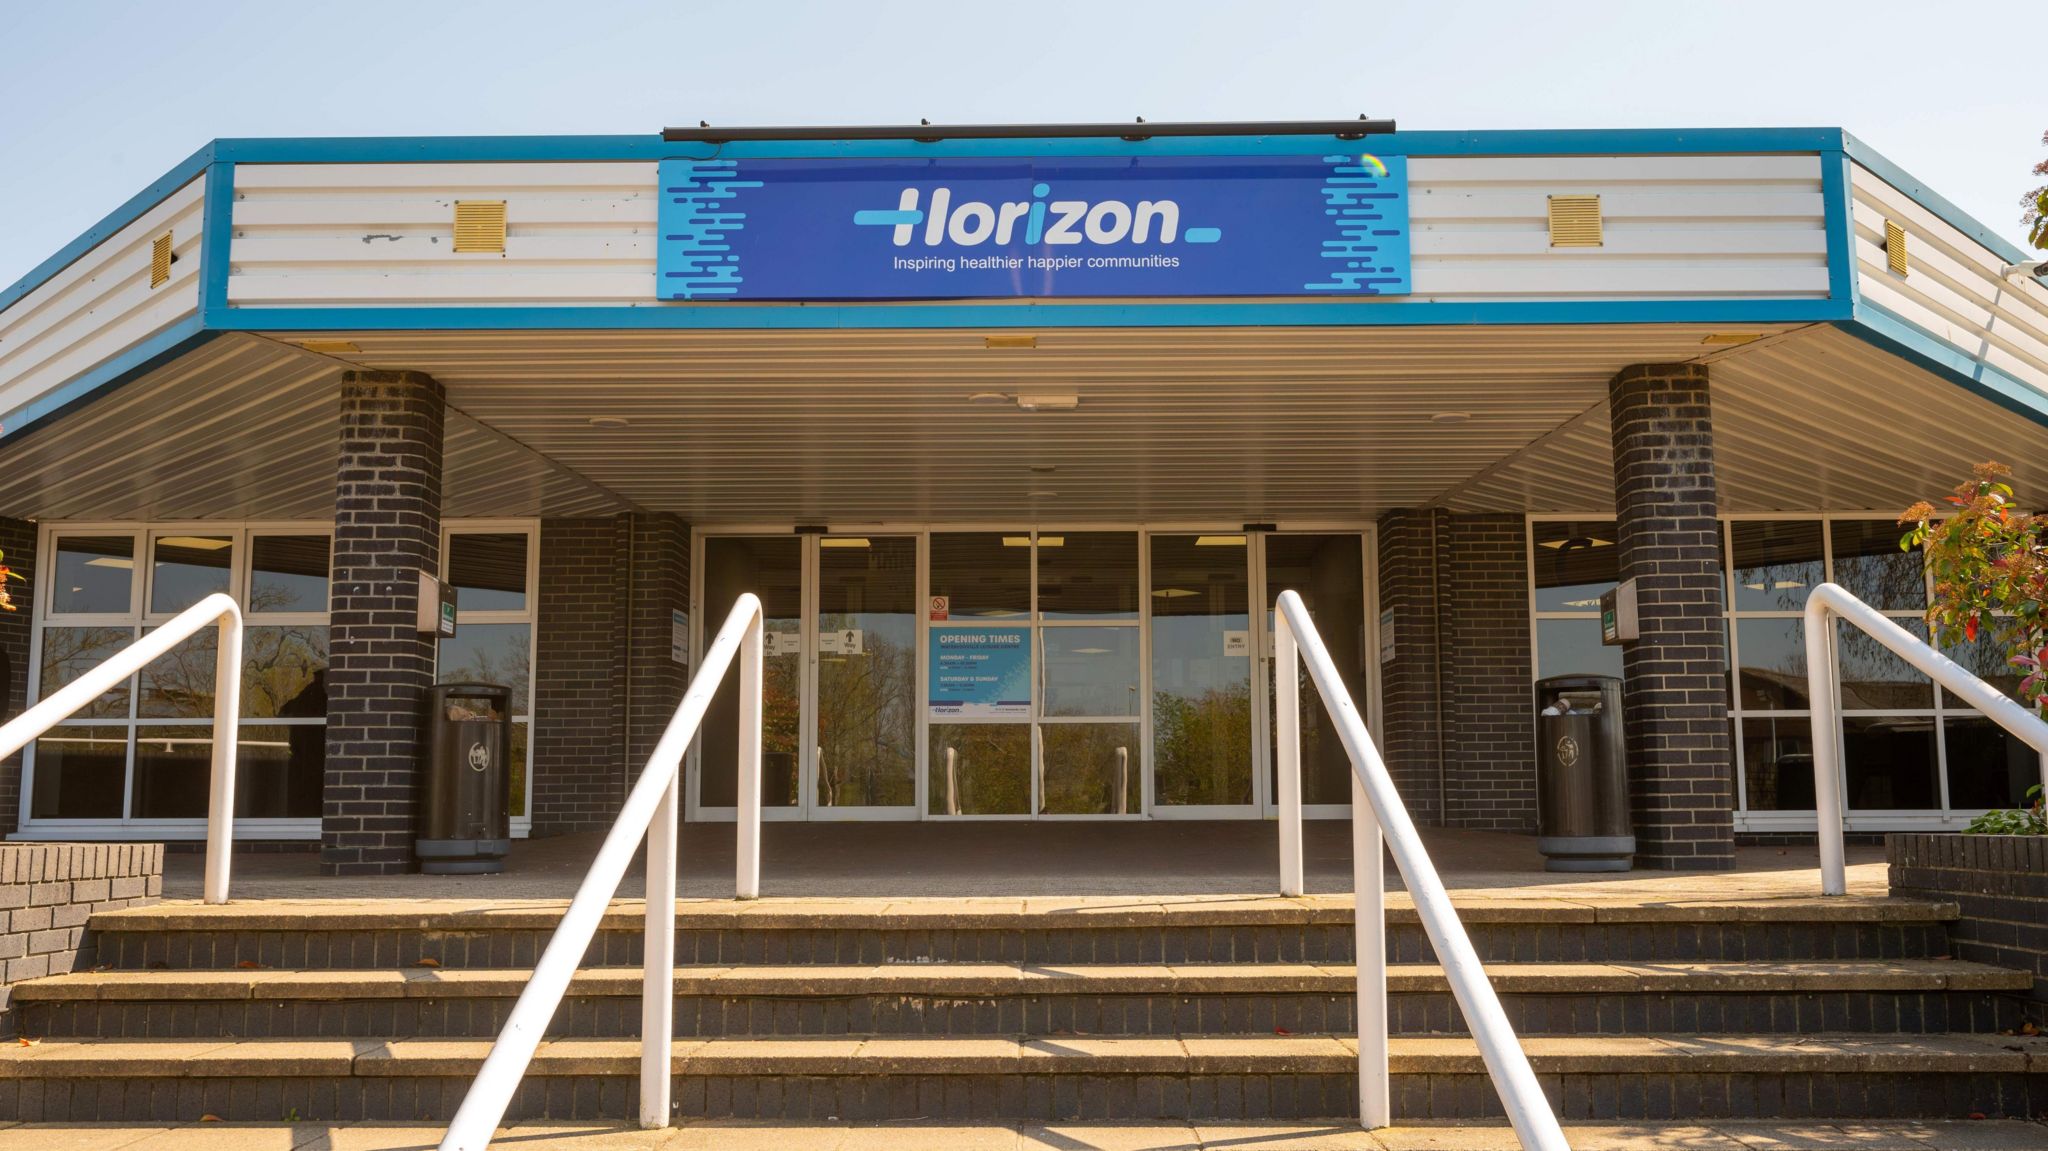 Horizon Leisure Centre, outside the building taken from the bottom of the steps shows big blue sign with the words Horizon